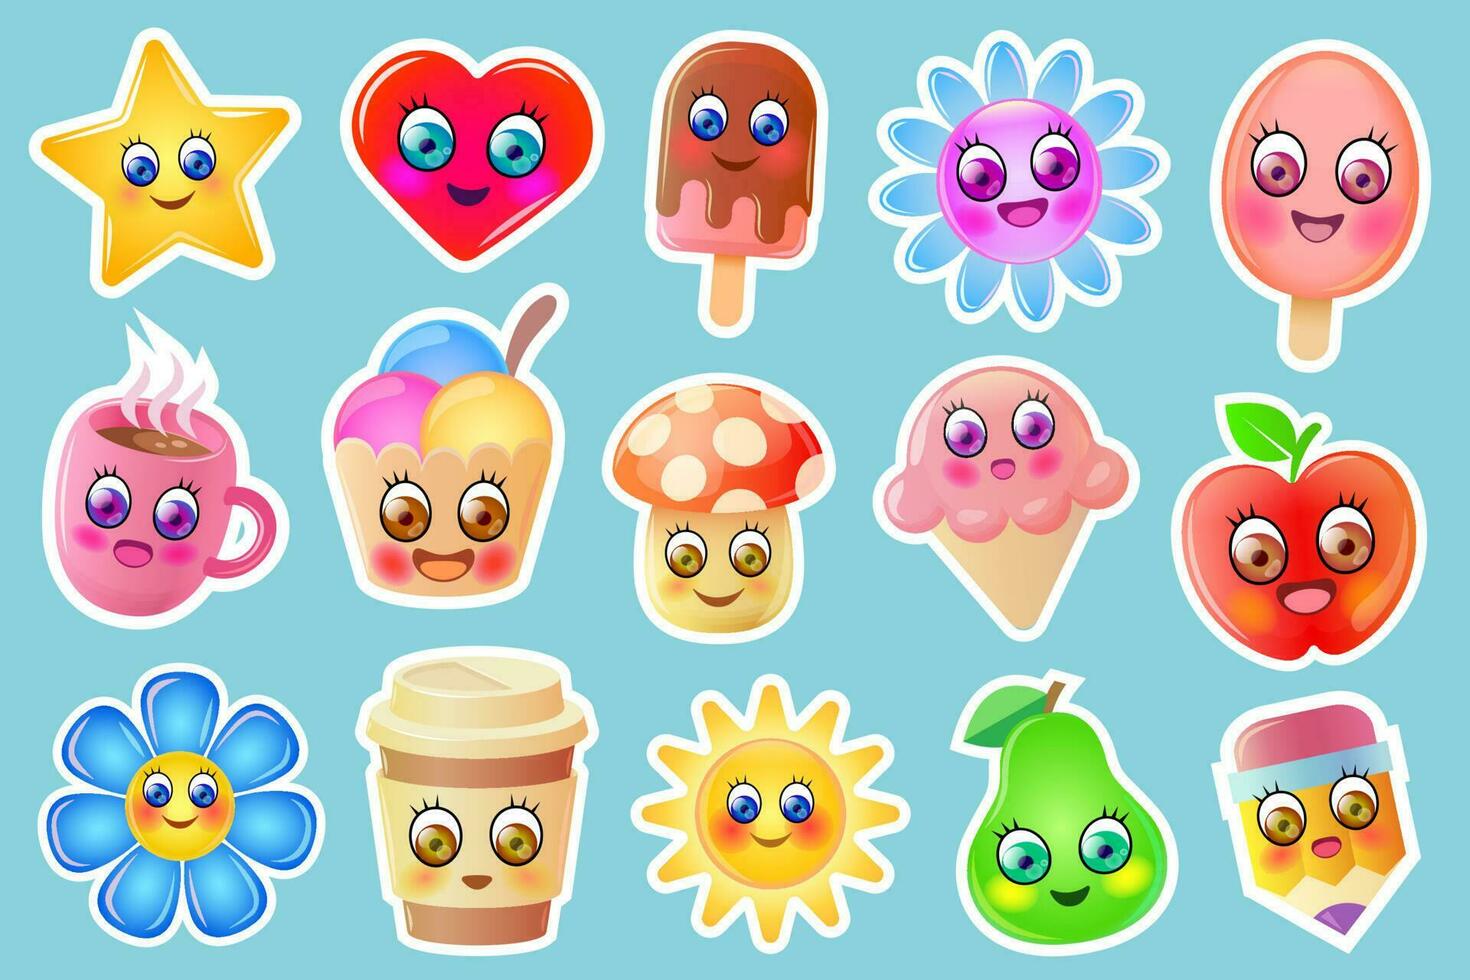 Cute stickers collection. Funny stickers with happy, funny cartoon characters. Cute flowers, ice creams, fruits and other cute characters. vector